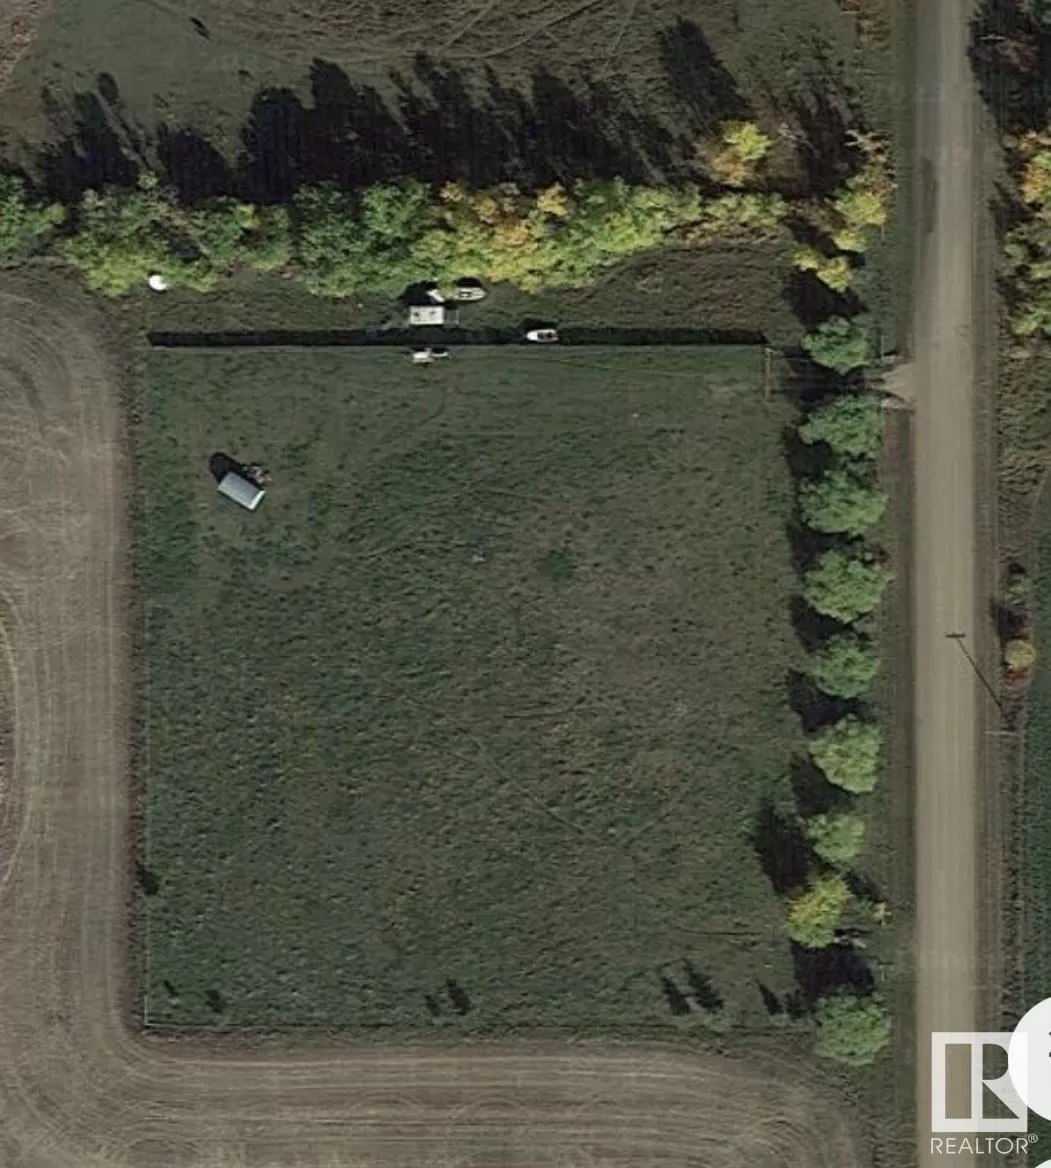 No Building for rent: W4 Rge20 Twp 55 Sec 17 Se, Rural Strathcona County, Alberta T0B 0S0